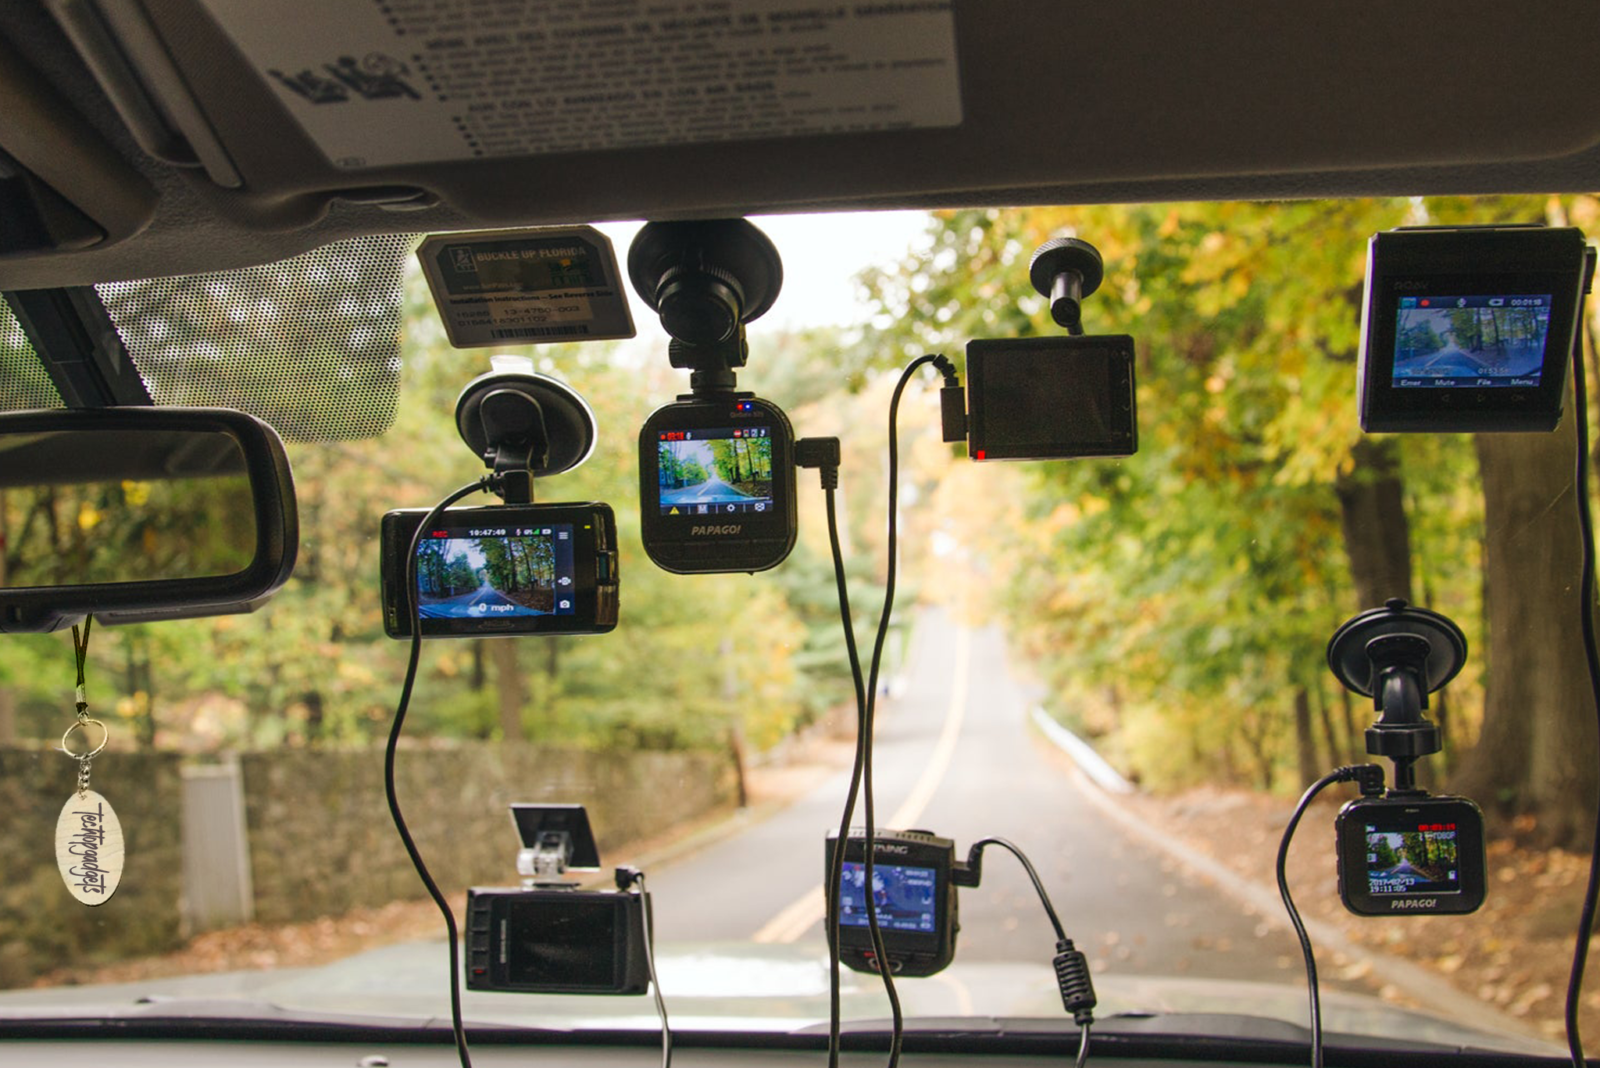 A diverse selection of the best dash cams mounted on a car windshield, providing a multi-angle view of the road ahead for enhanced driving safety.